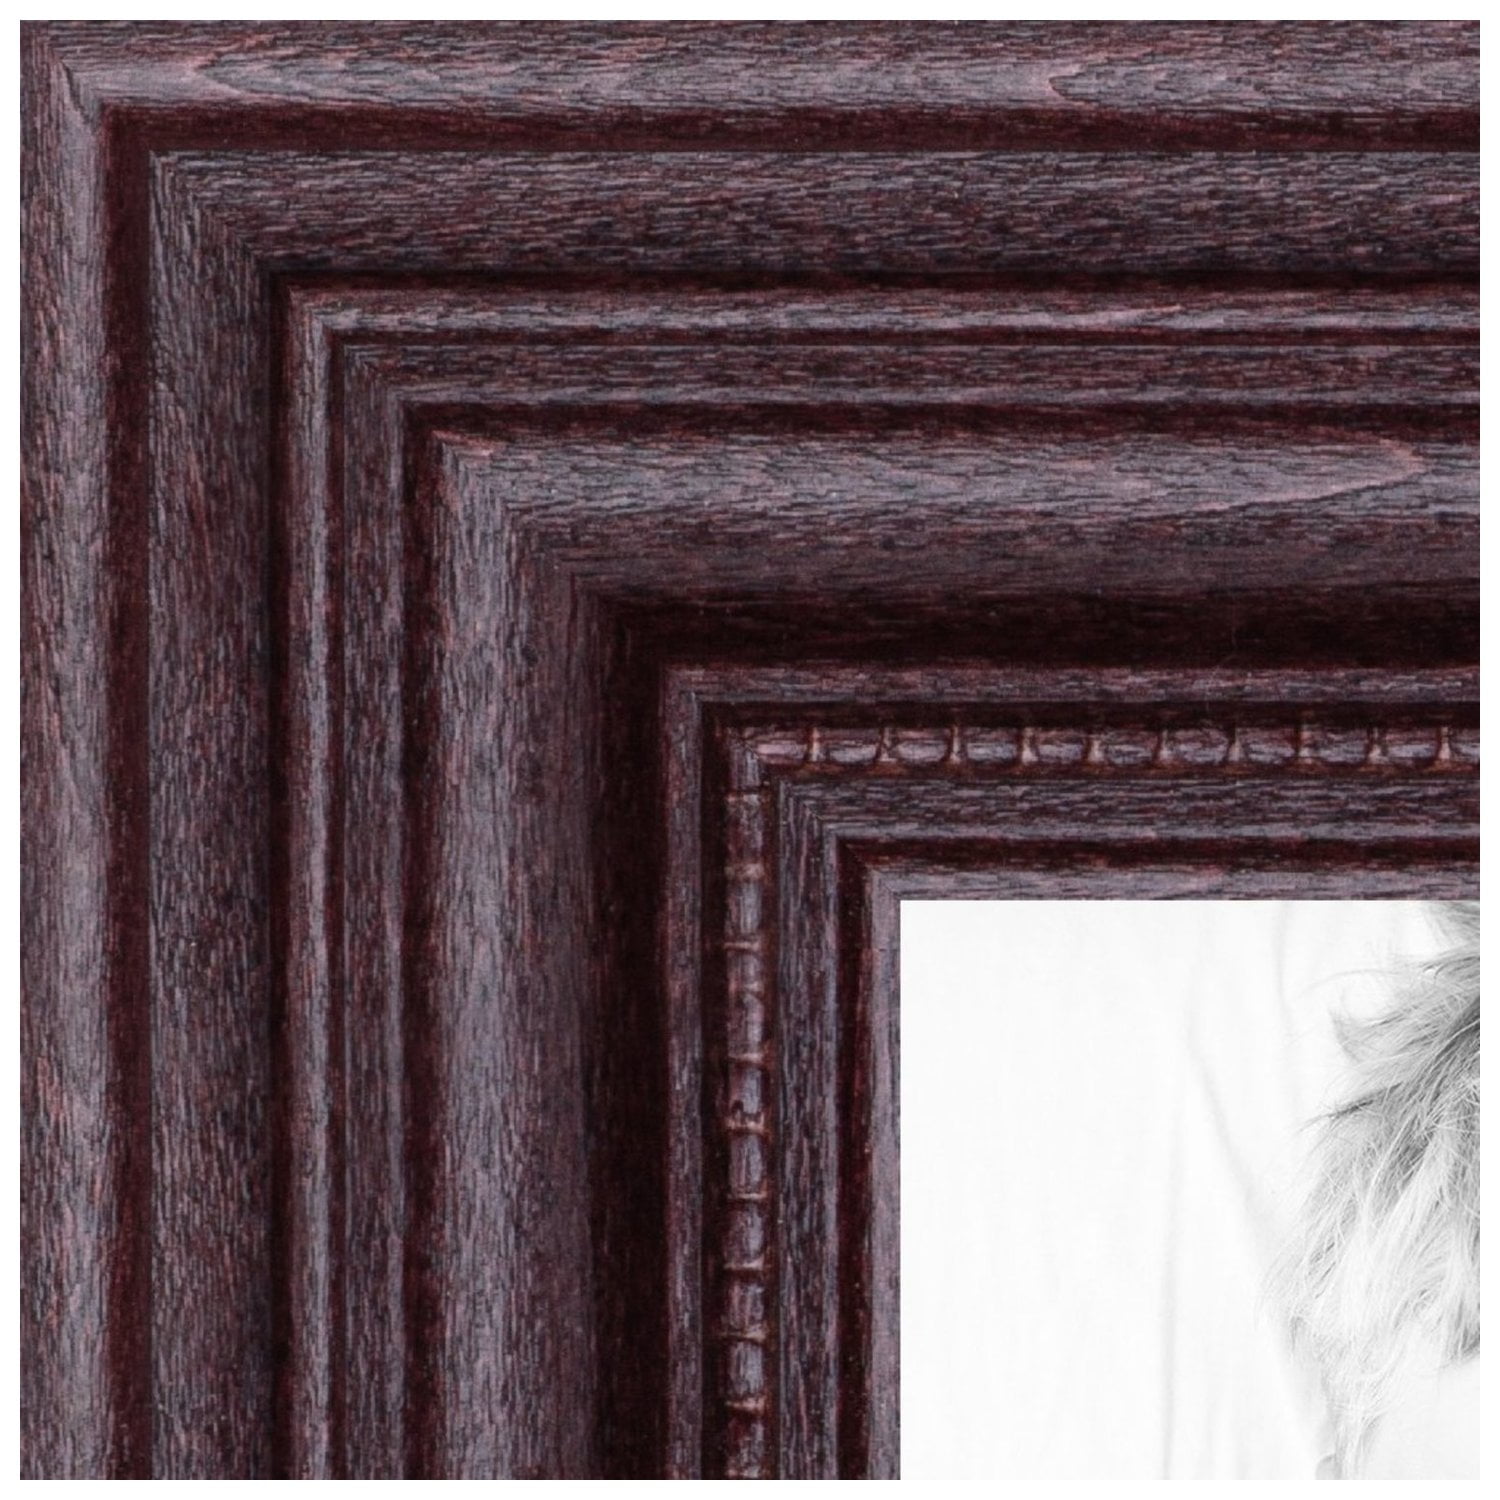 Black 4x10 Picture Frame Wood For 4 x 10 inch Poster Photo — Modern Memory  Design Picture frames